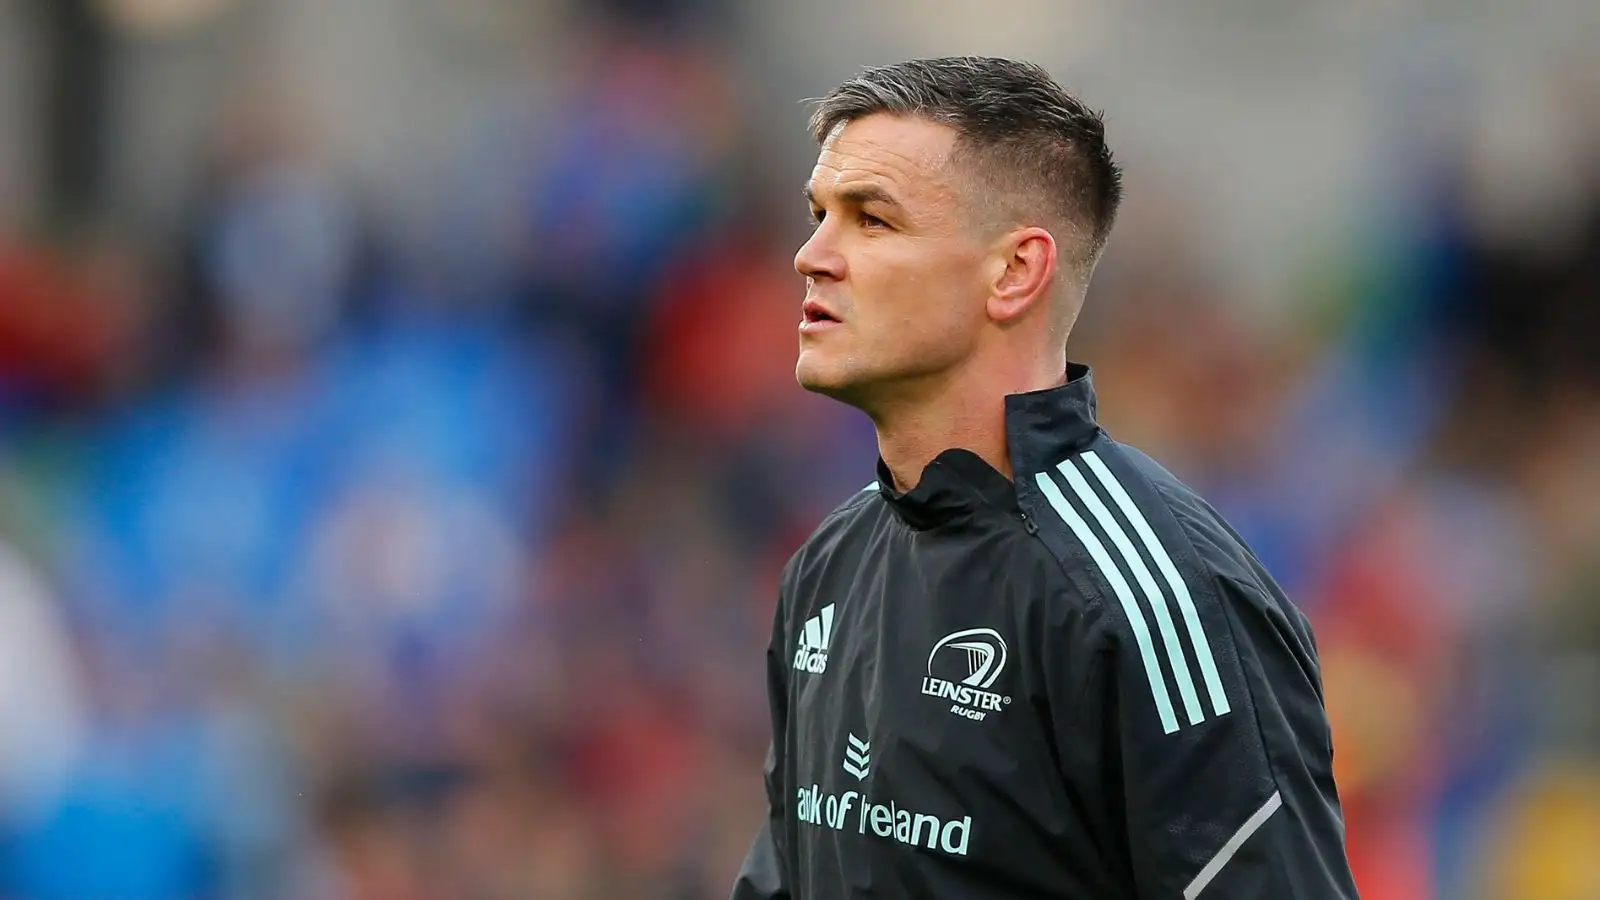 Leinster Rugby have confirmed that ten players will be leaving the club at the end of the season, including captain Johnny Sexton who is set to retire.